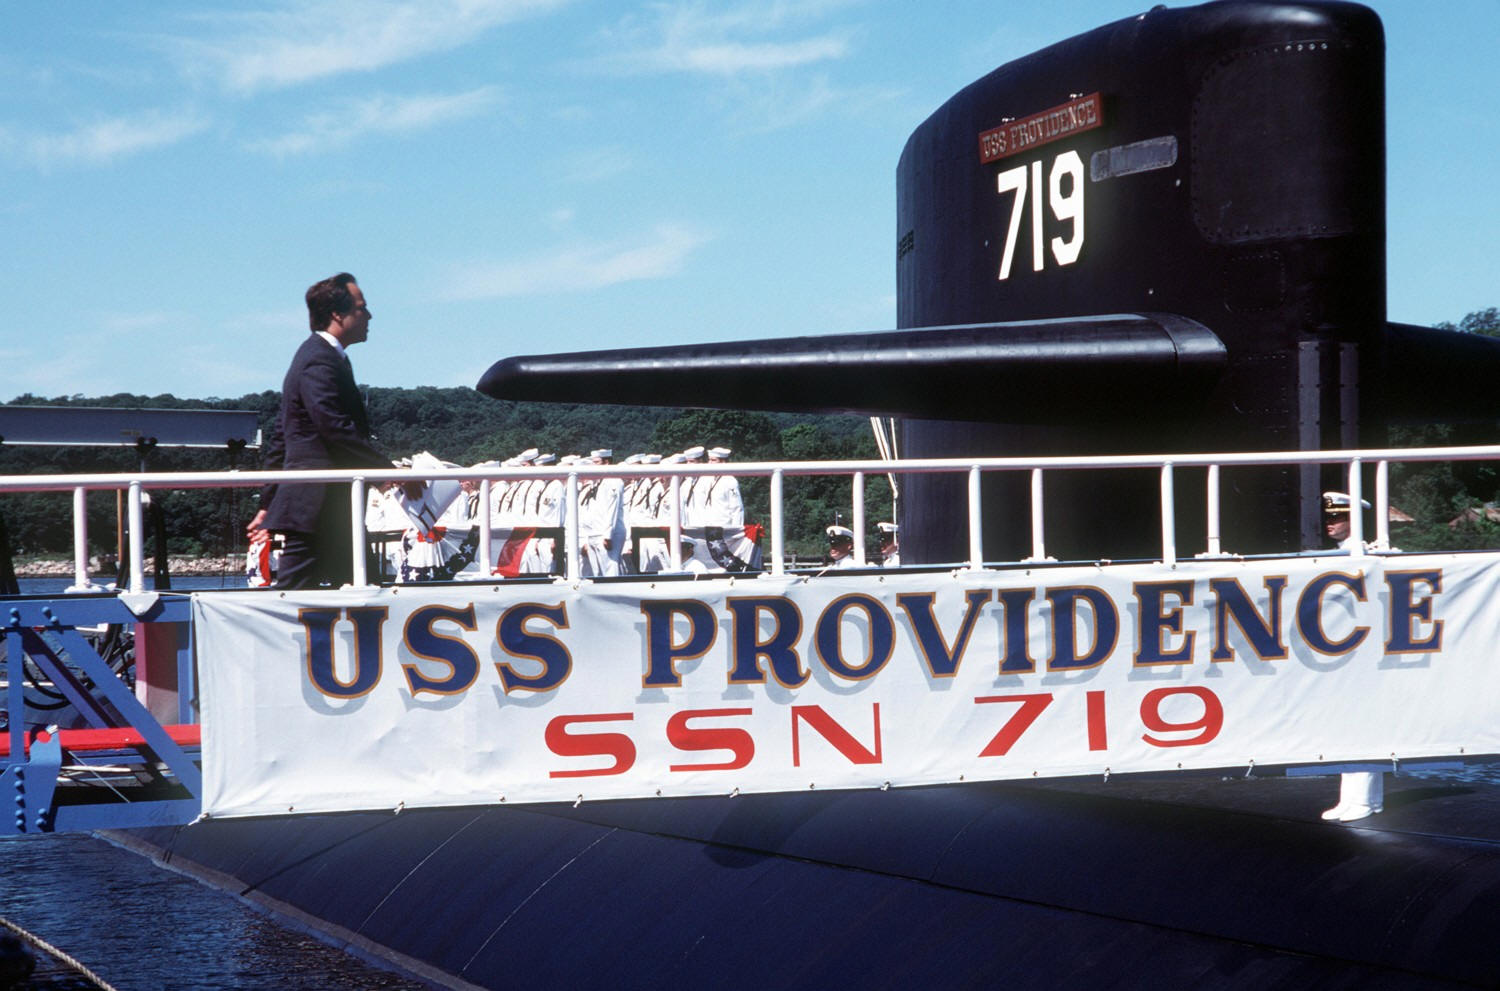 ssn-719 uss providence commissioning 1985